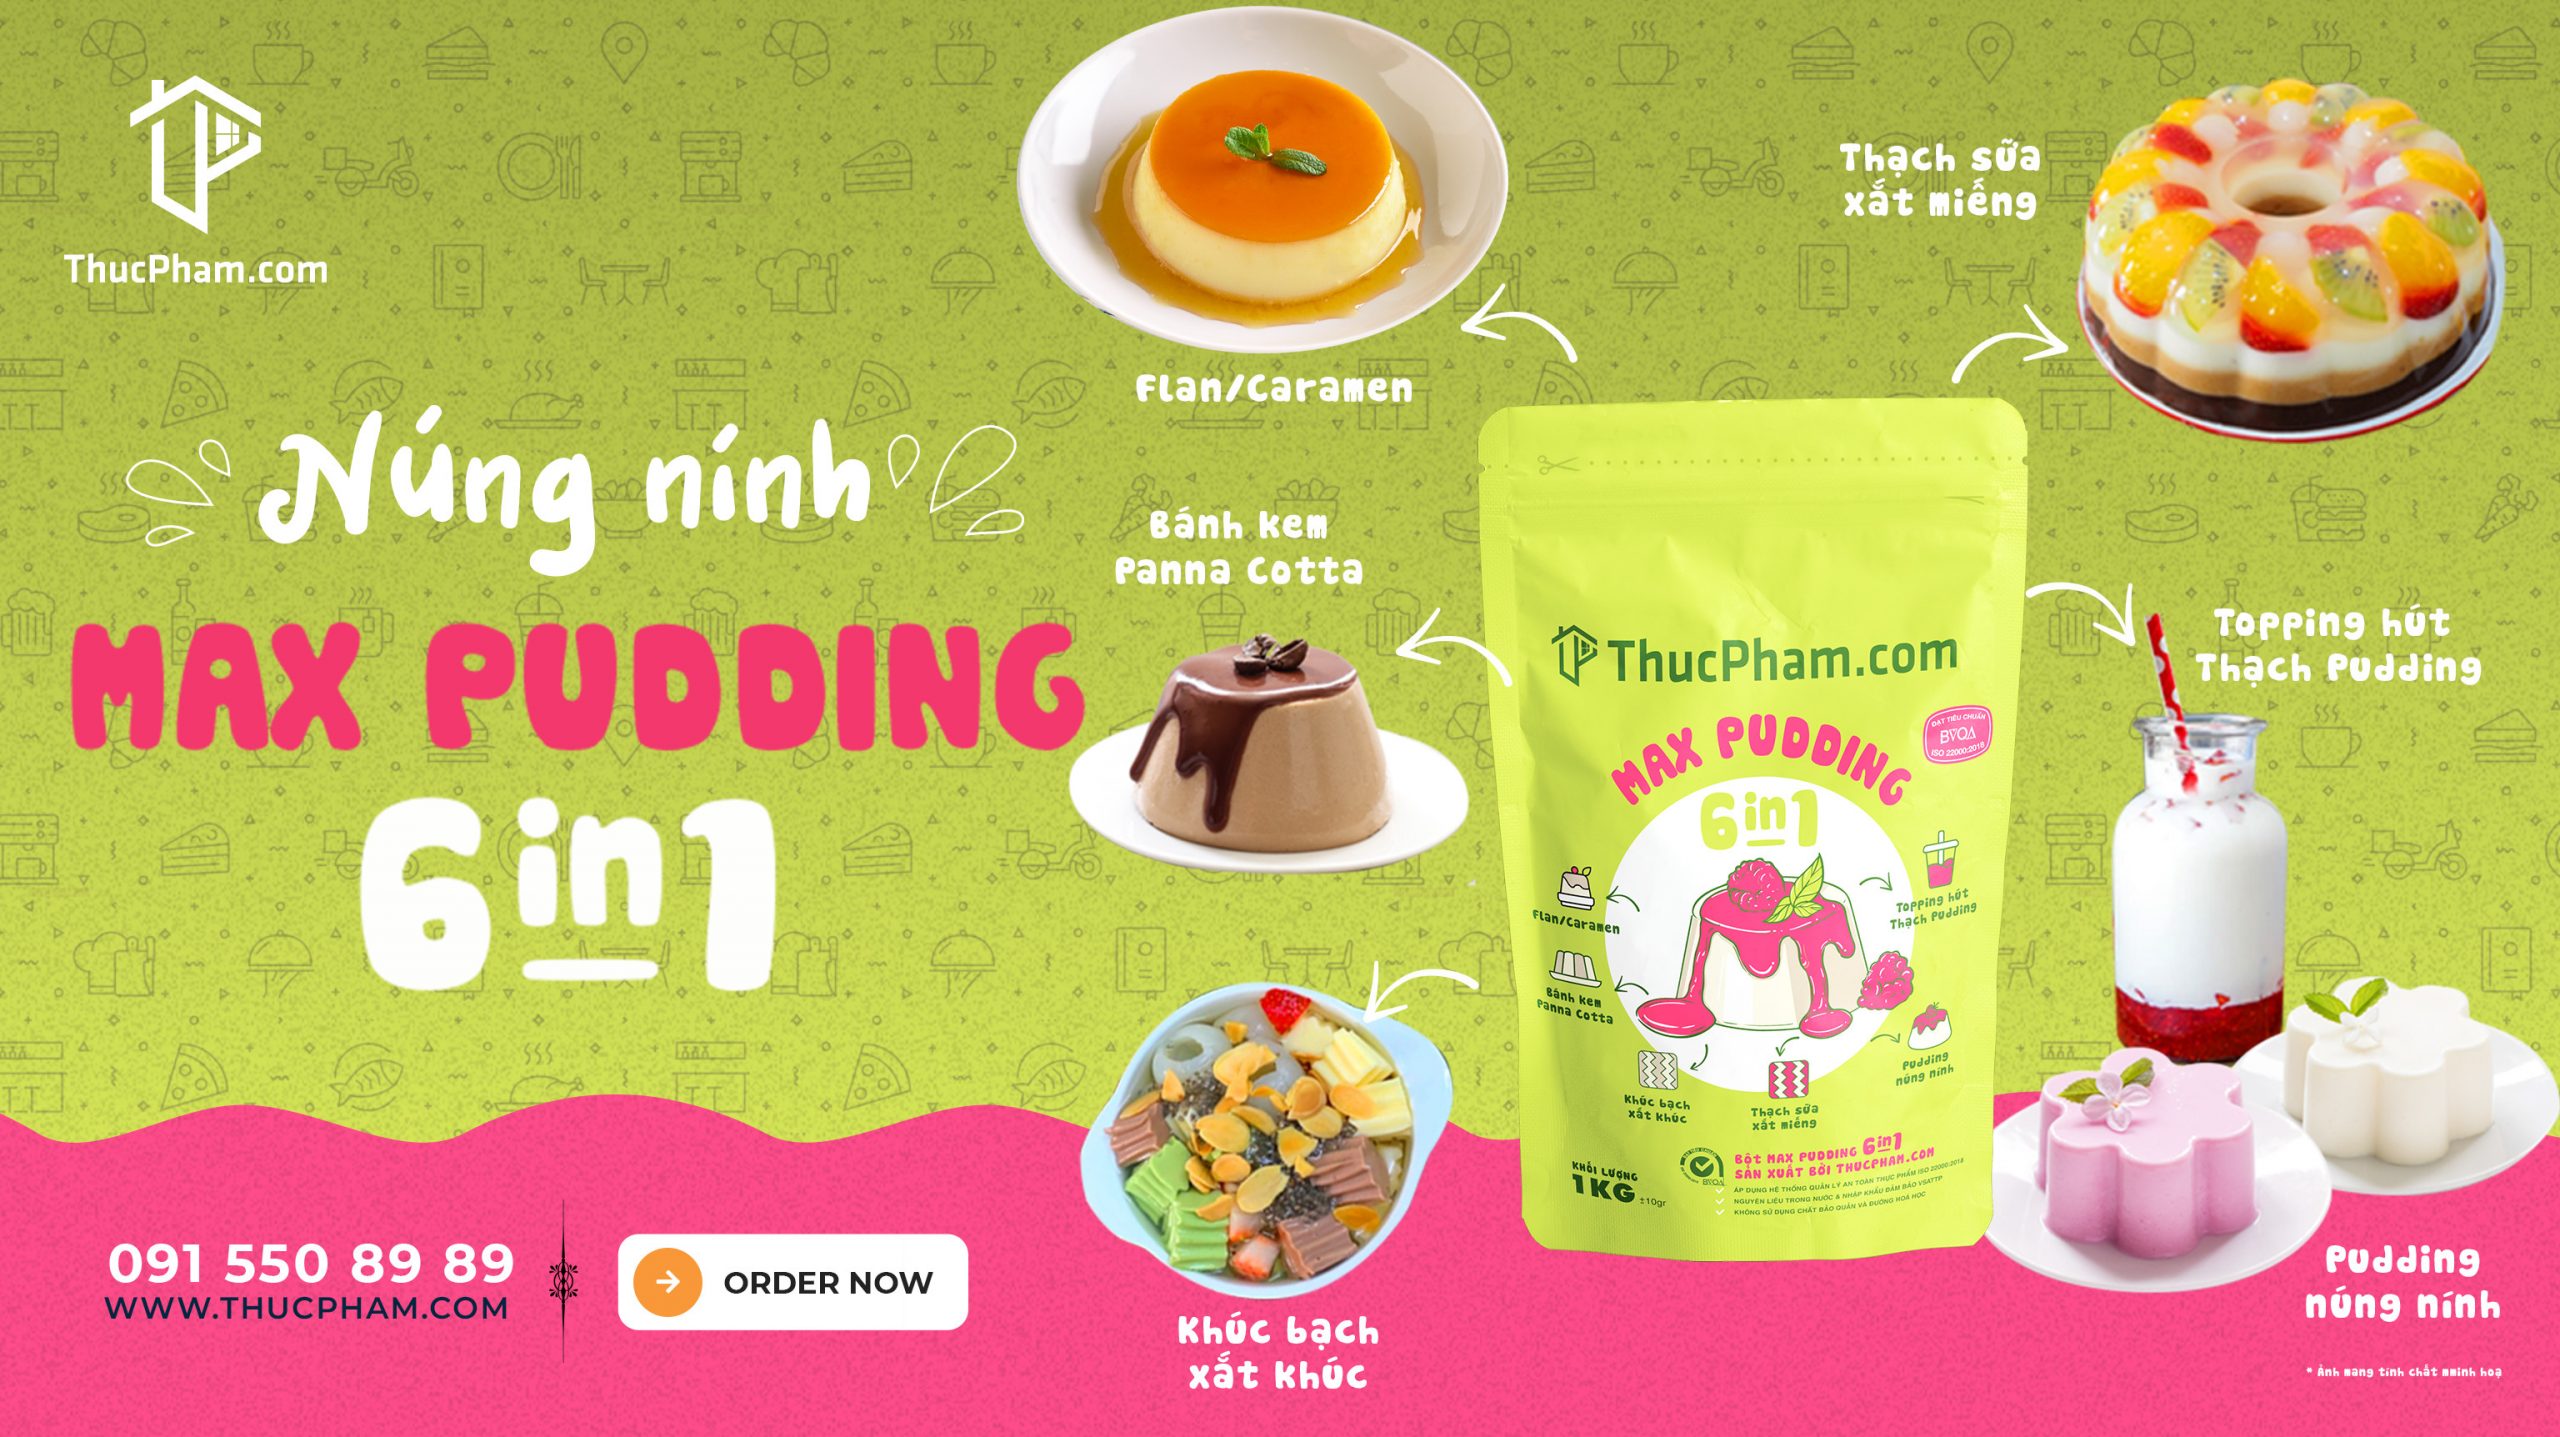 bột max pudding 6in1 Thucphamcom